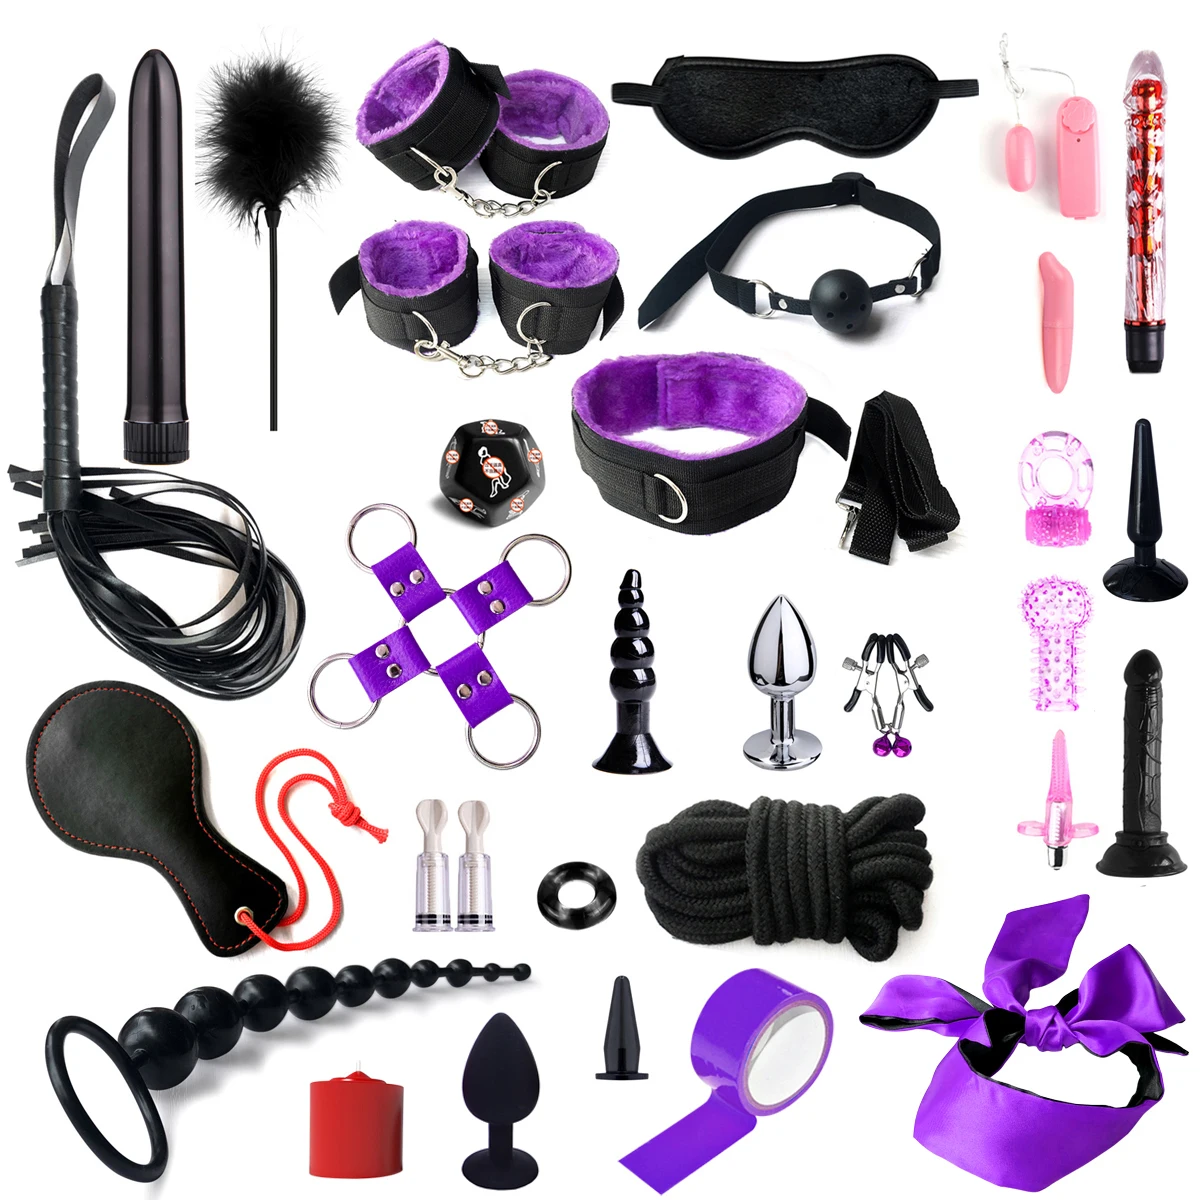 32PCS Sexy BDSM Kits Bondage Set Sex Toys Handcuffs Sex Games Whip Gag Nipple Clamps Sex Toys For Couples Erotic Accessories